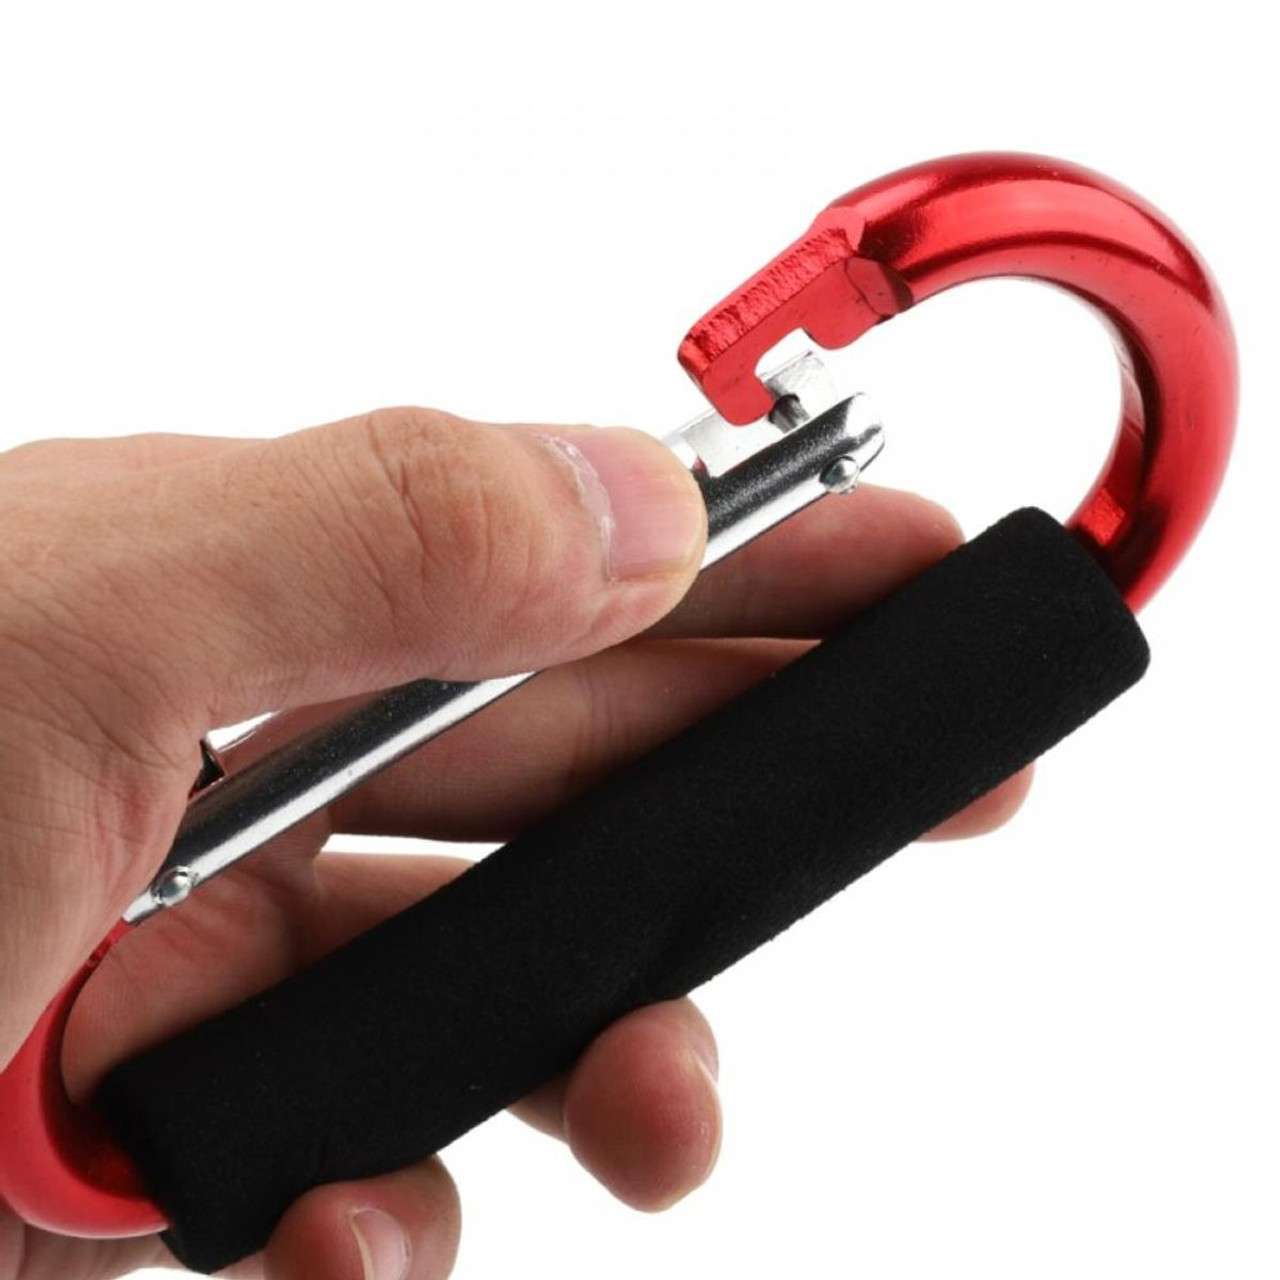  Large Carabiner with Carrying Handle (1- or 2-Pack) product image